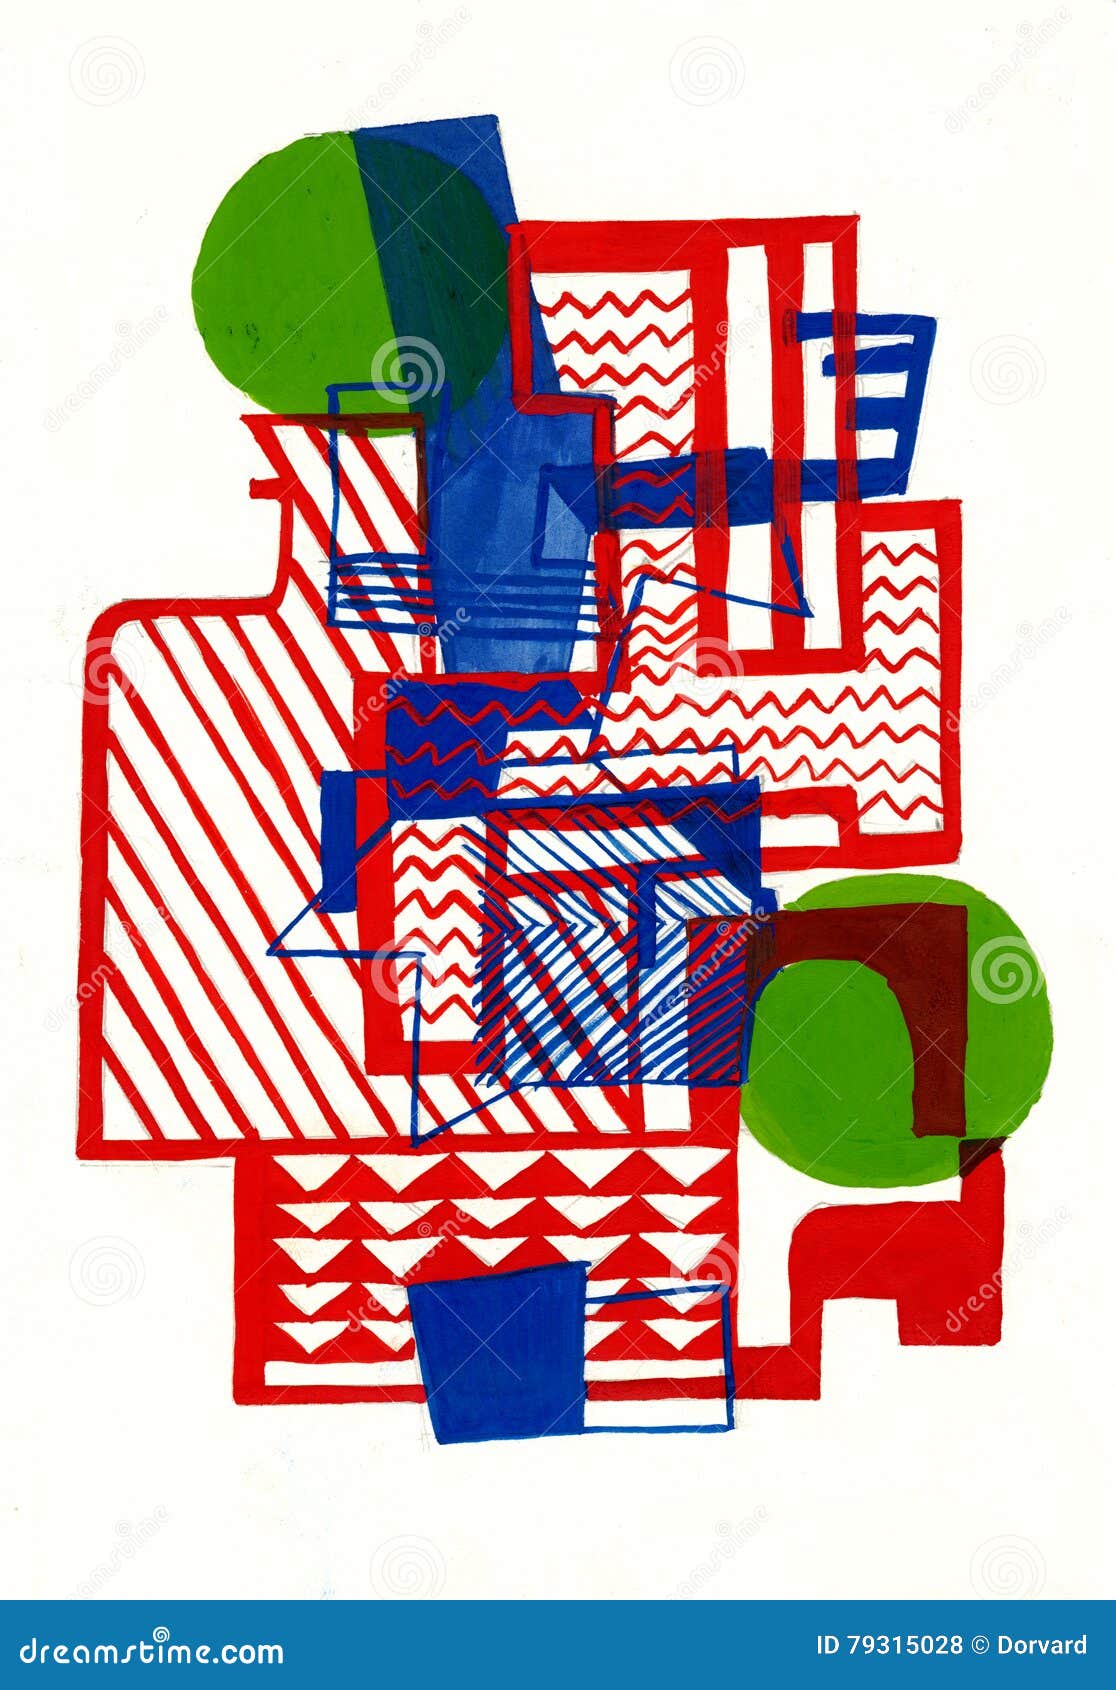 burle marx abstract composition